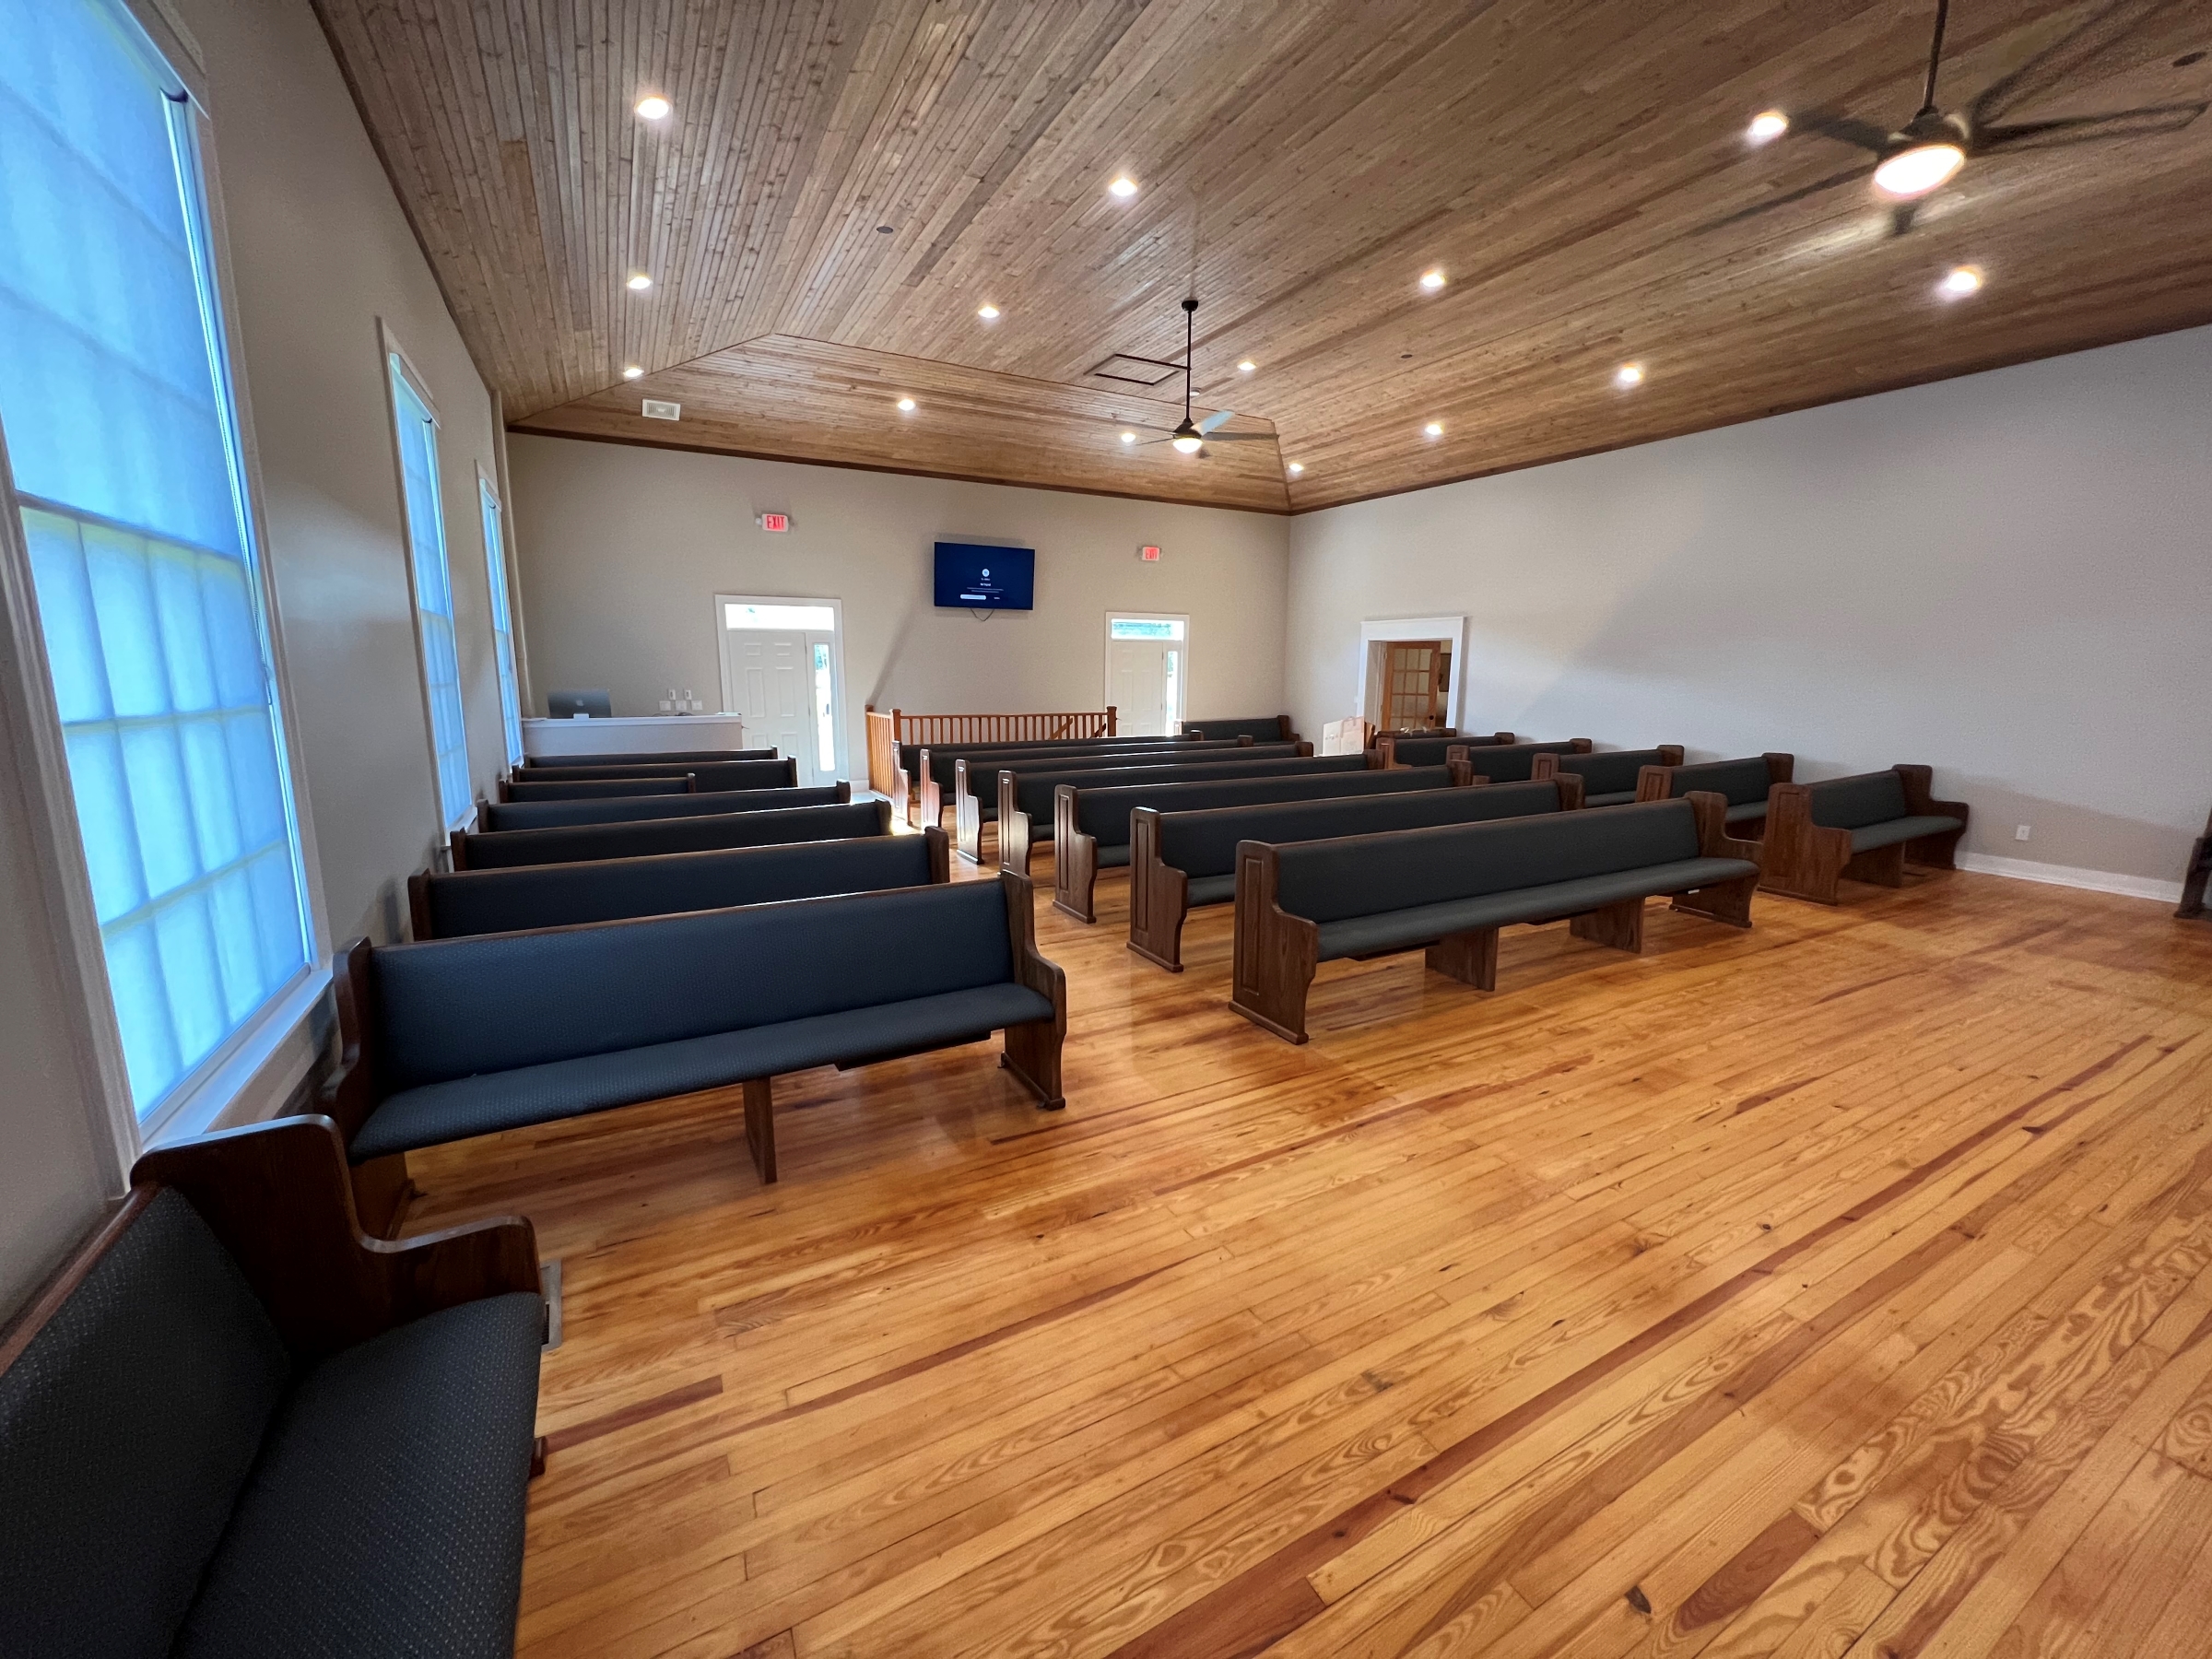 corner view of Pews refinished after tornado destroyed Hopewell Church in Canmer, Kentucky. Work by Woods Church Interiors